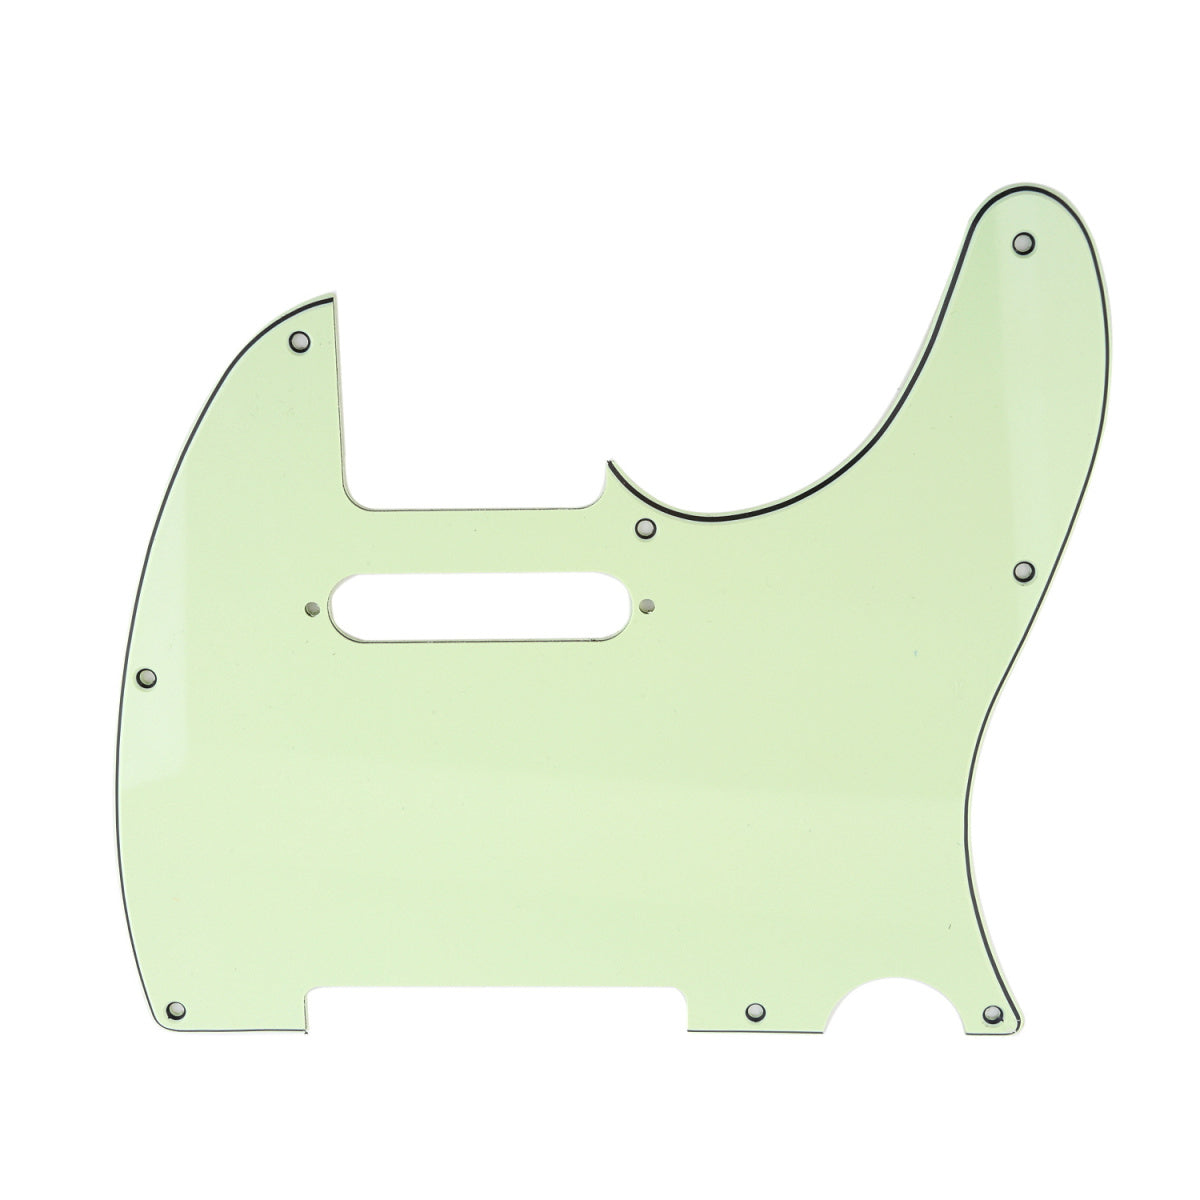 Musiclily 8 Hole Tele Guitar Pickguard for USA/Mexican Made Fender Standard Telecaster Modern Style, 3Ply Mint